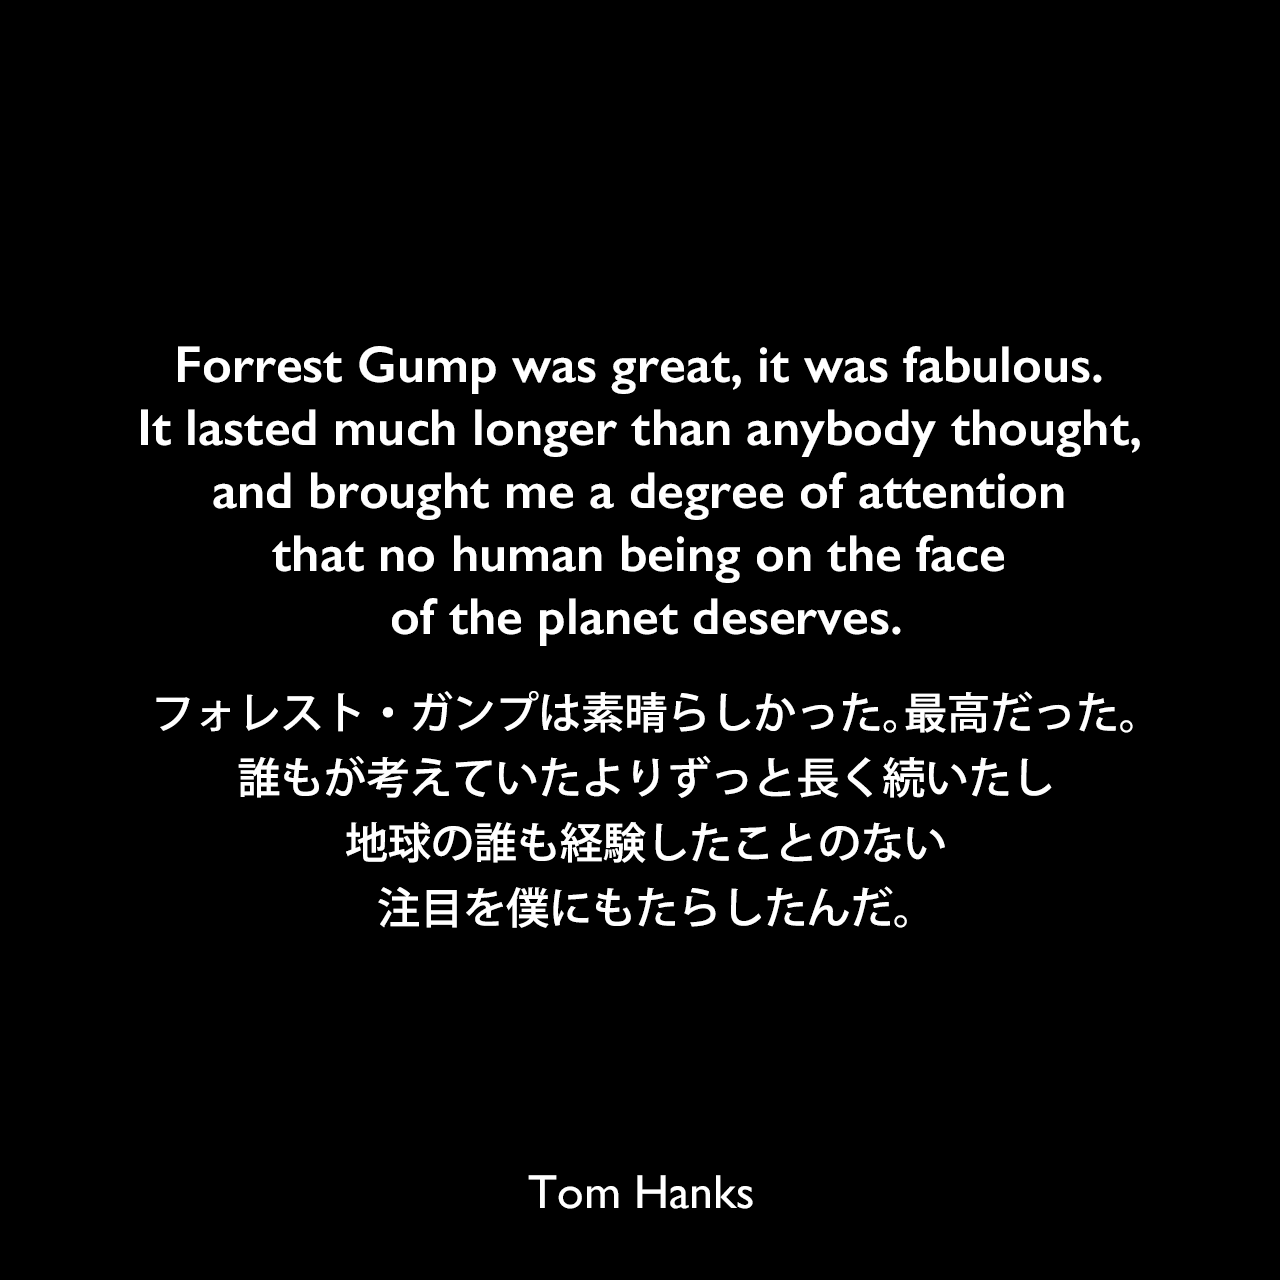 Forrest Gump was great, it was fabulous. It lasted much longer than anybody thought, and brought me a degree of attention that no human being on the face of the planet deserves.フォレスト・ガンプは素晴らしかった。最高だった。誰もが考えていたよりずっと長く続いたし、地球の誰も経験したことのない注目を僕にもたらしたんだ。Tom Hanks